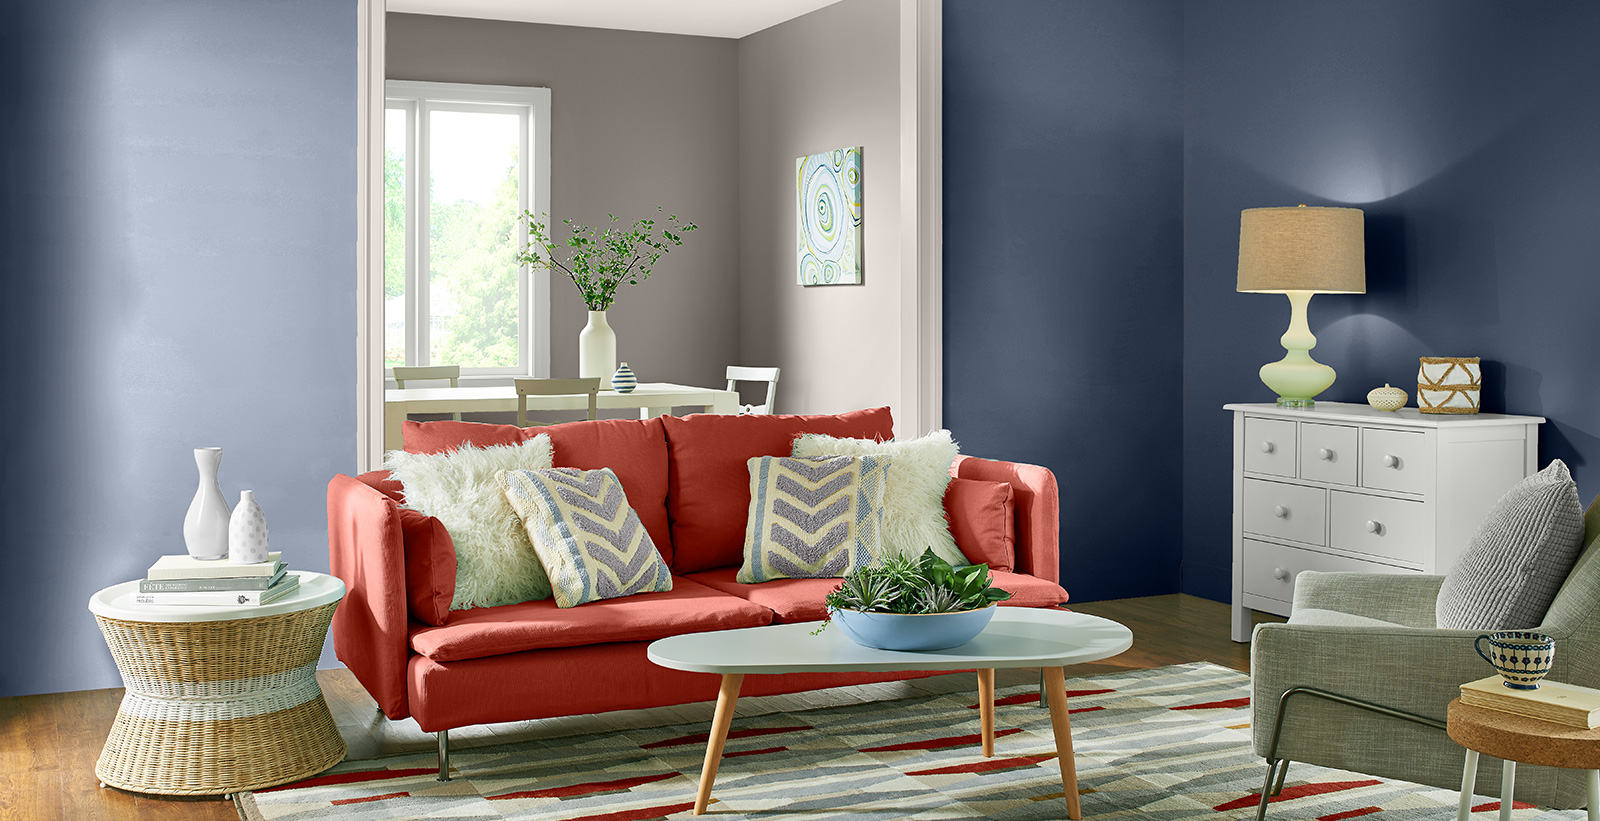 Mid-century living room with blue on walls, white on trim, and red couch